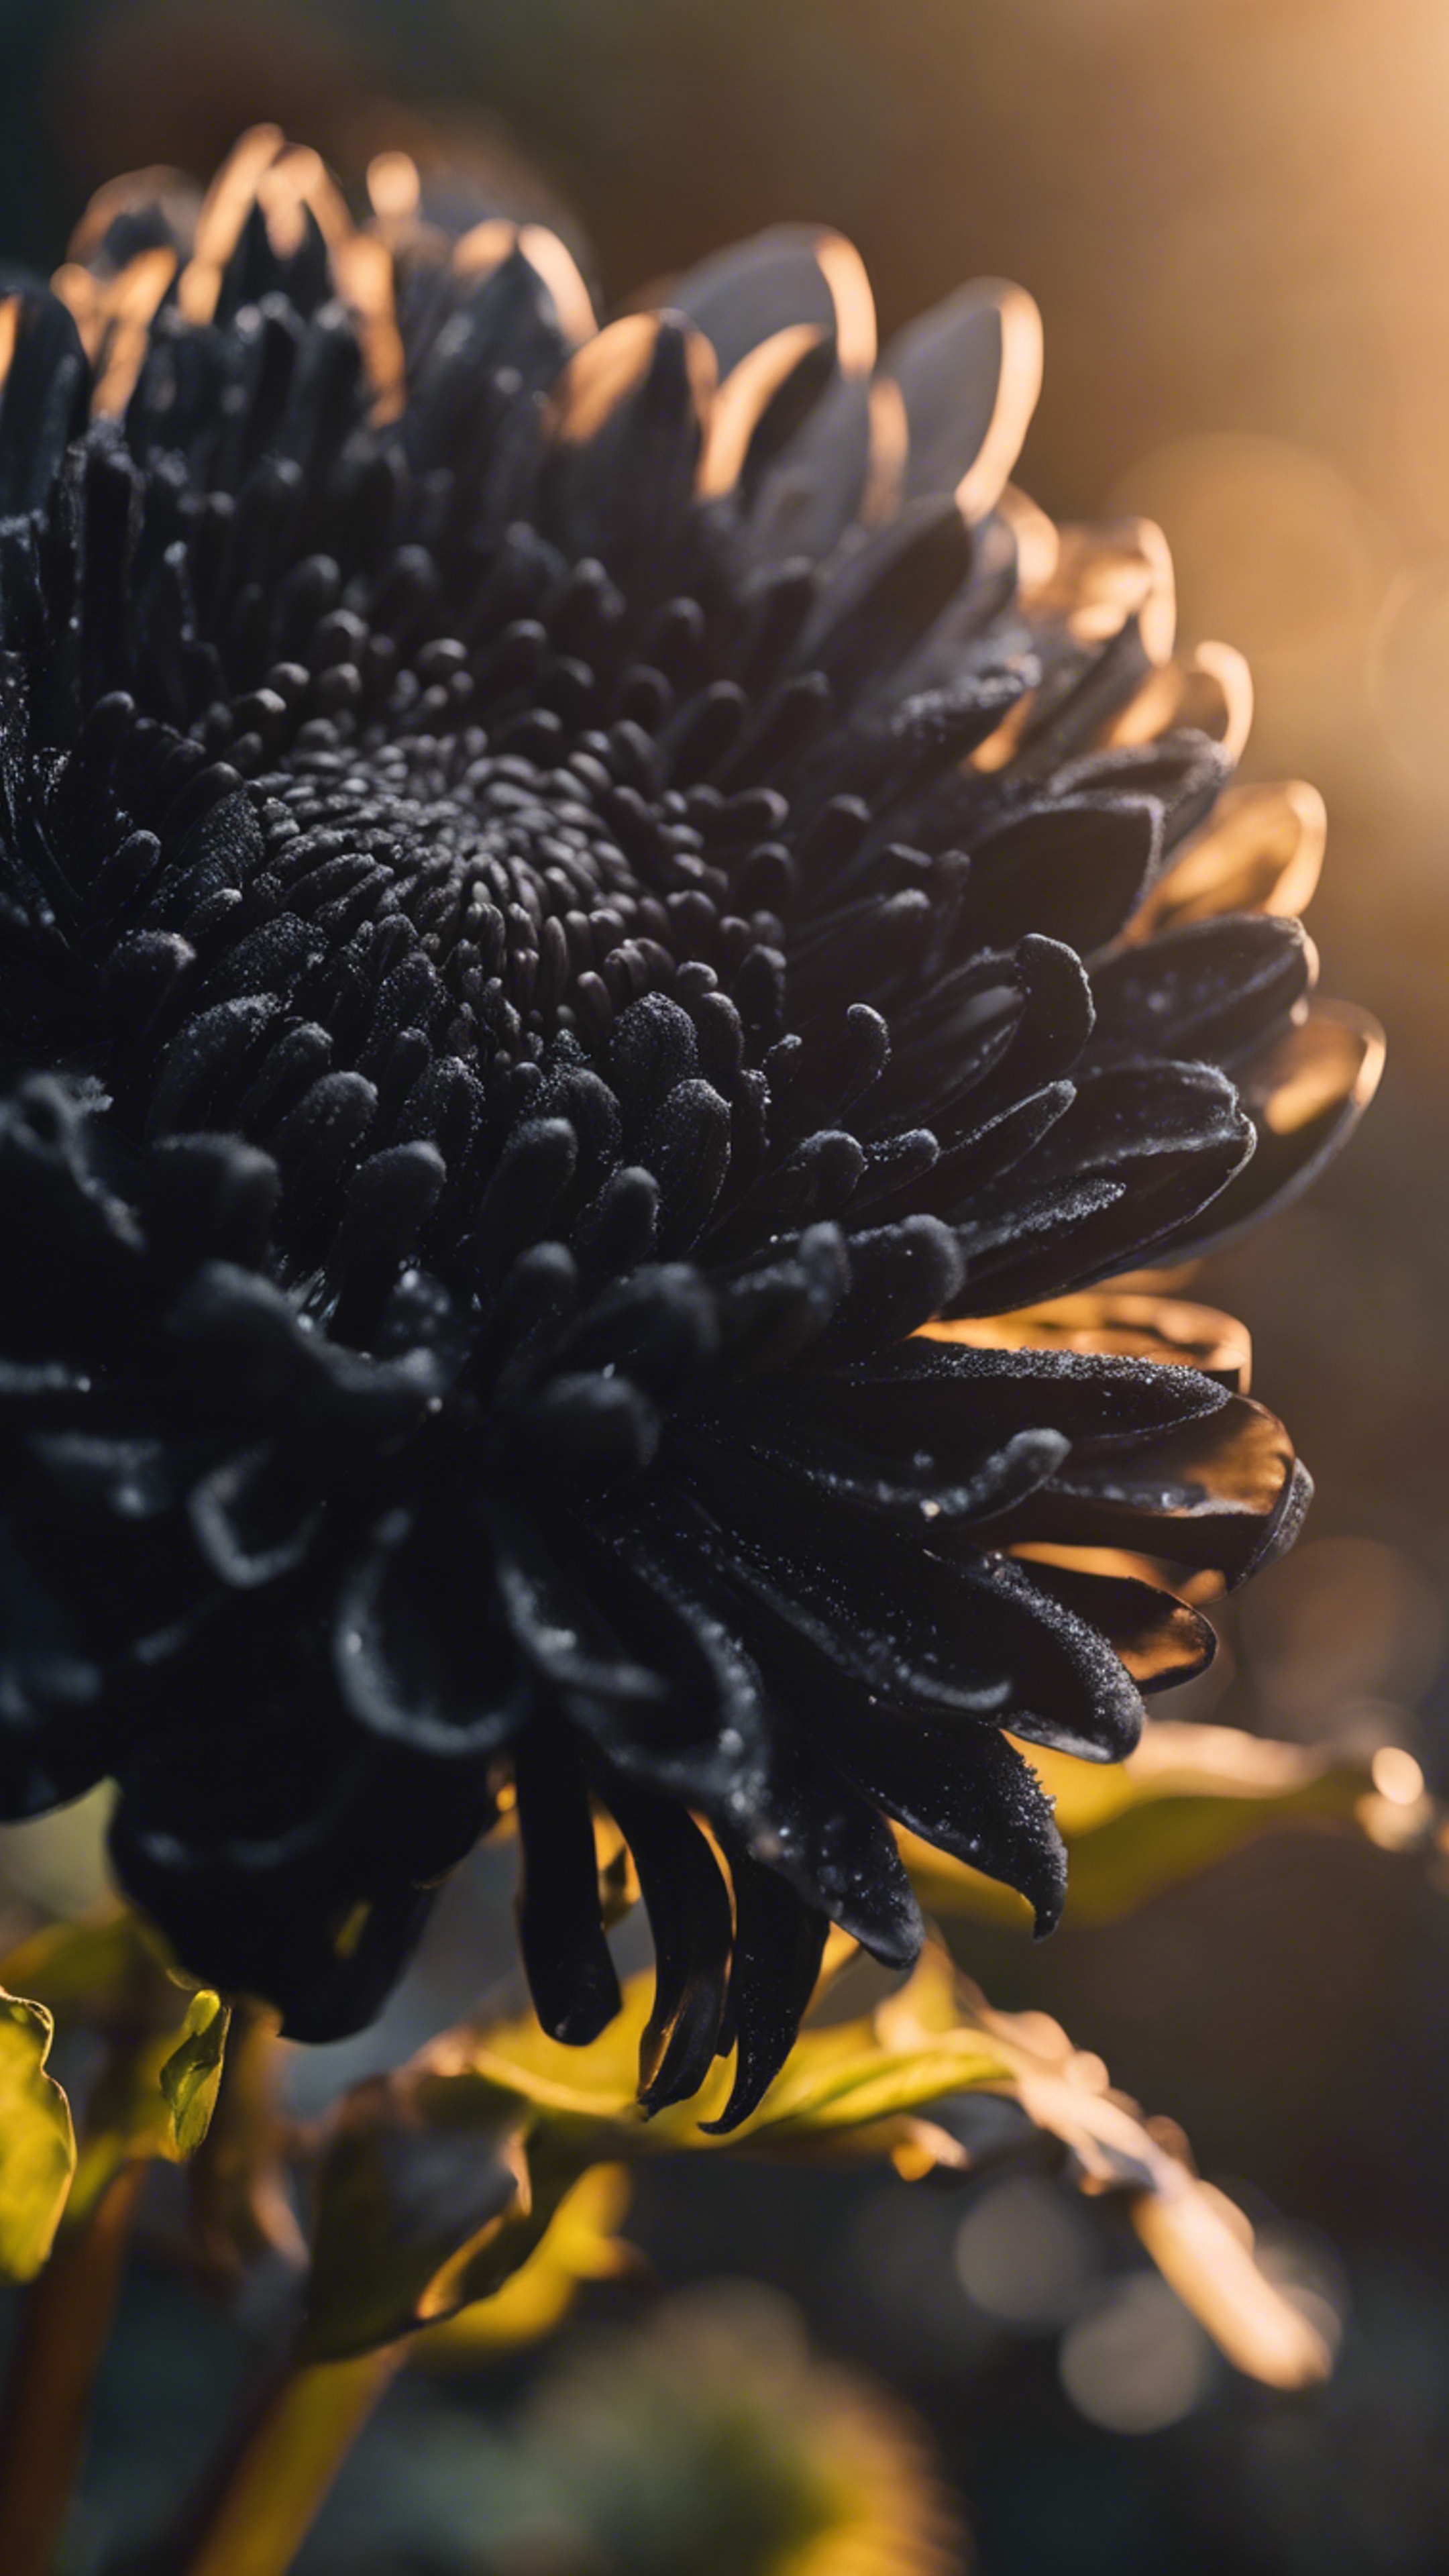 An ethereal black chrysanthemum with intricate petals against a backdrop of the setting sun. Tapet[4b40c3df292a42548d77]